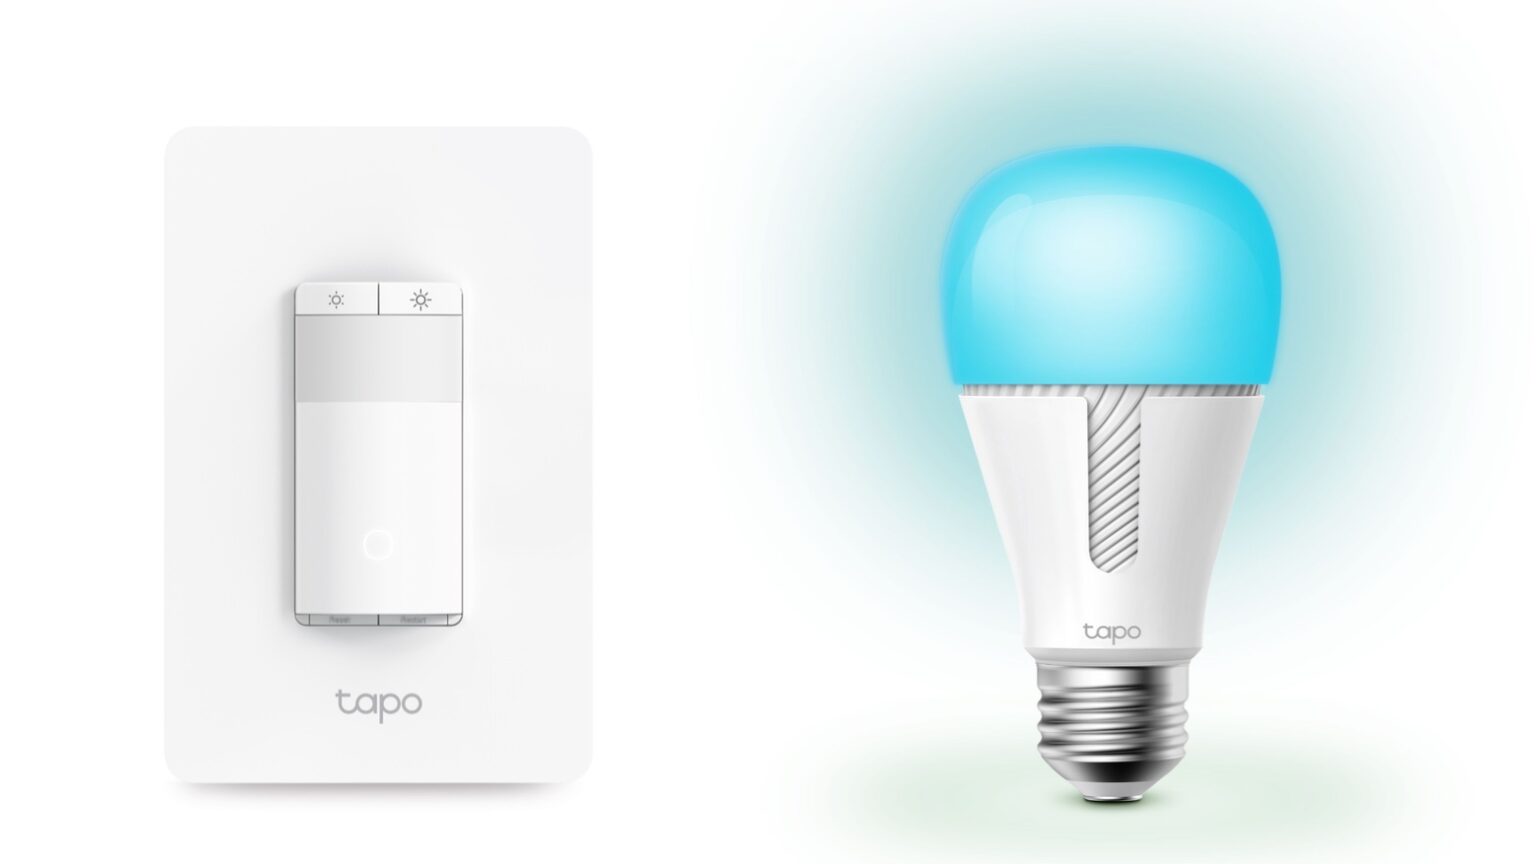 TP-Link’s extensive new Tapo lineup of smart plugs, lights and sensors support Apple HomeKit